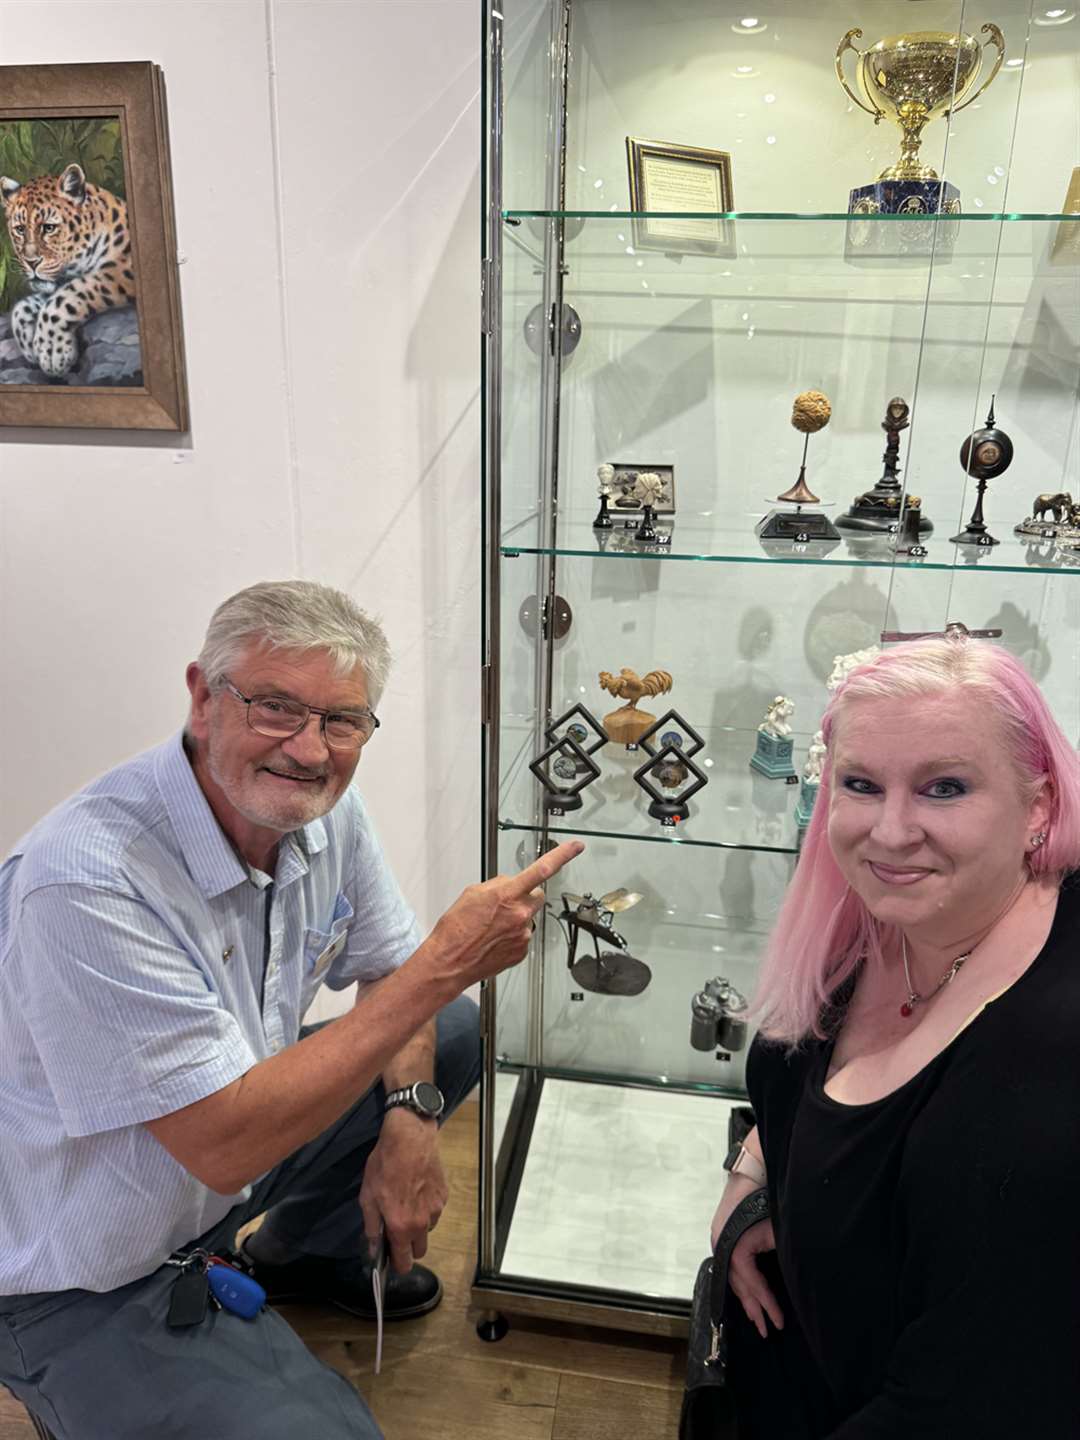 Peter Hayton bought one of Yvonne Jack’s coins which was included in the display (Yvonne Jack/PA)